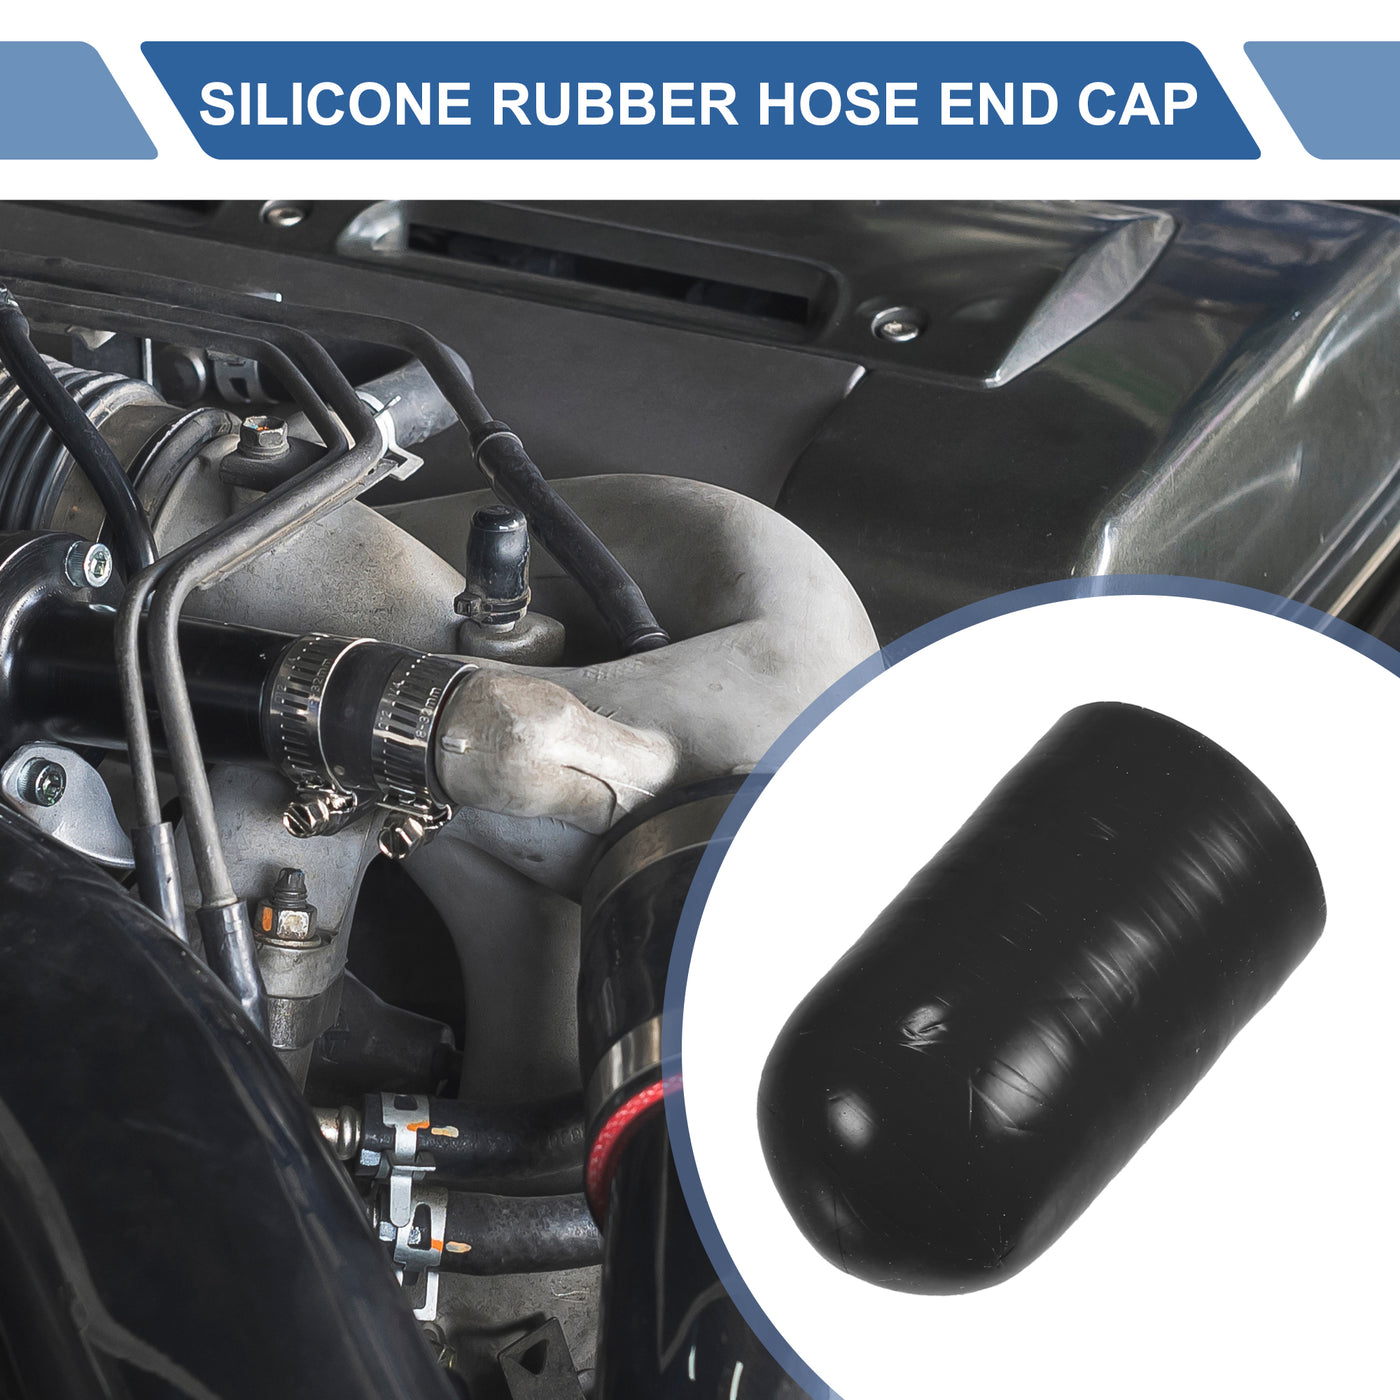 X AUTOHAUX 1 Set 30mm Length 18mm/0.71" ID Black Car Silicone Rubber Hose End Cap with Clamps Silicone Reinforced Blanking Cap for Bypass Tube Universal